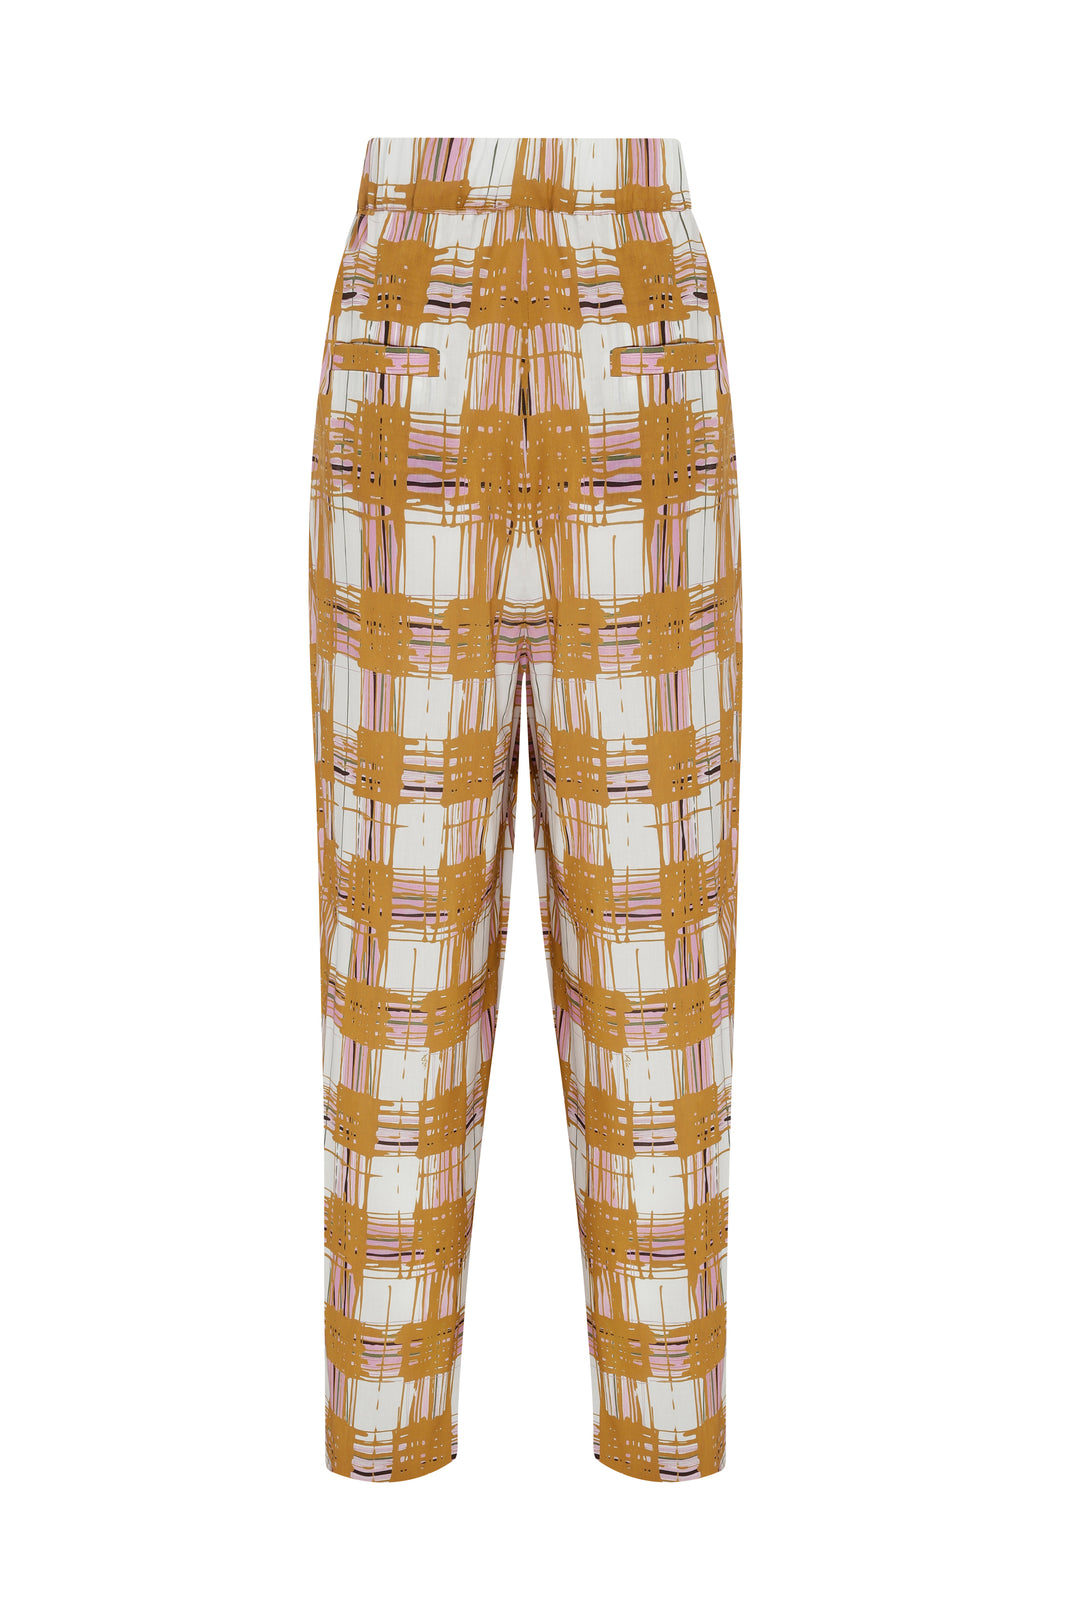 YAZ - Madras Printed Ankle Length Pants With Side Pockets